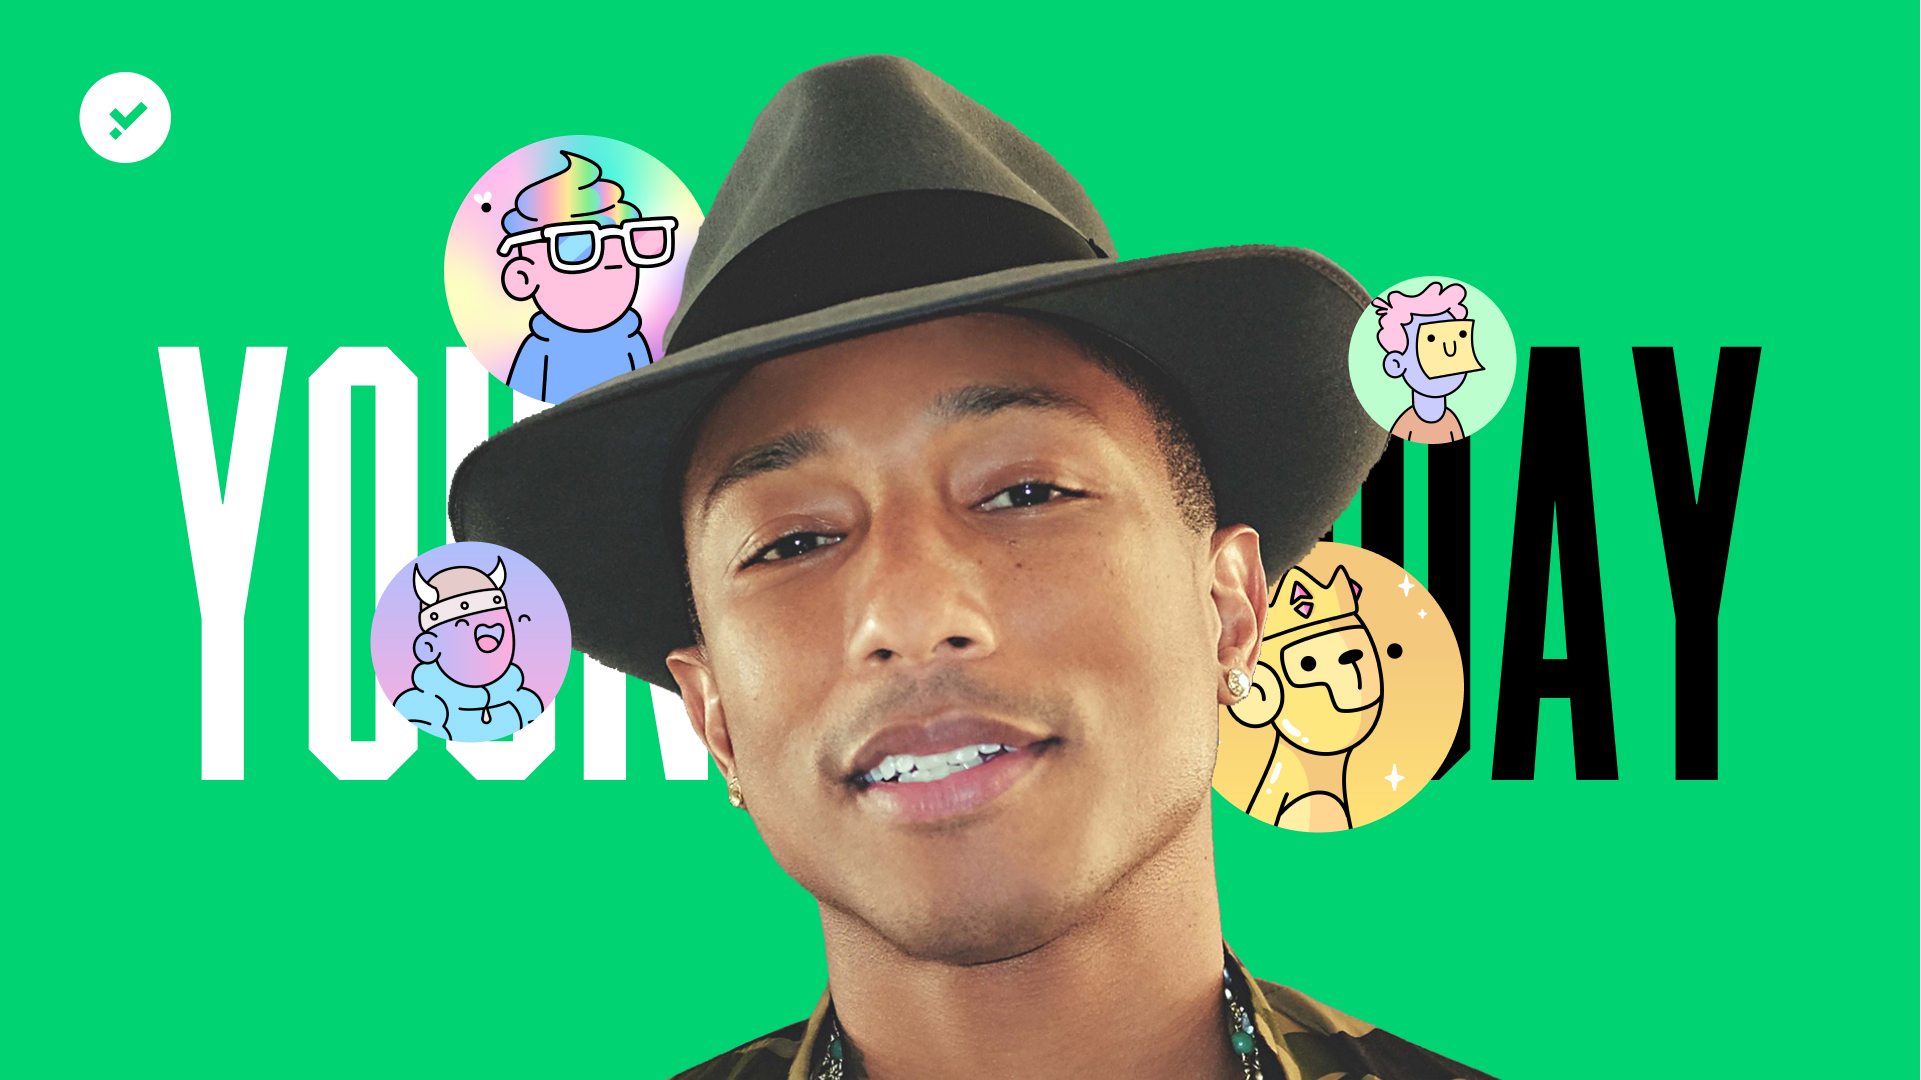 Pride in the Metaverse, Carbon neutral Polygon, Pharrell Williams NFT